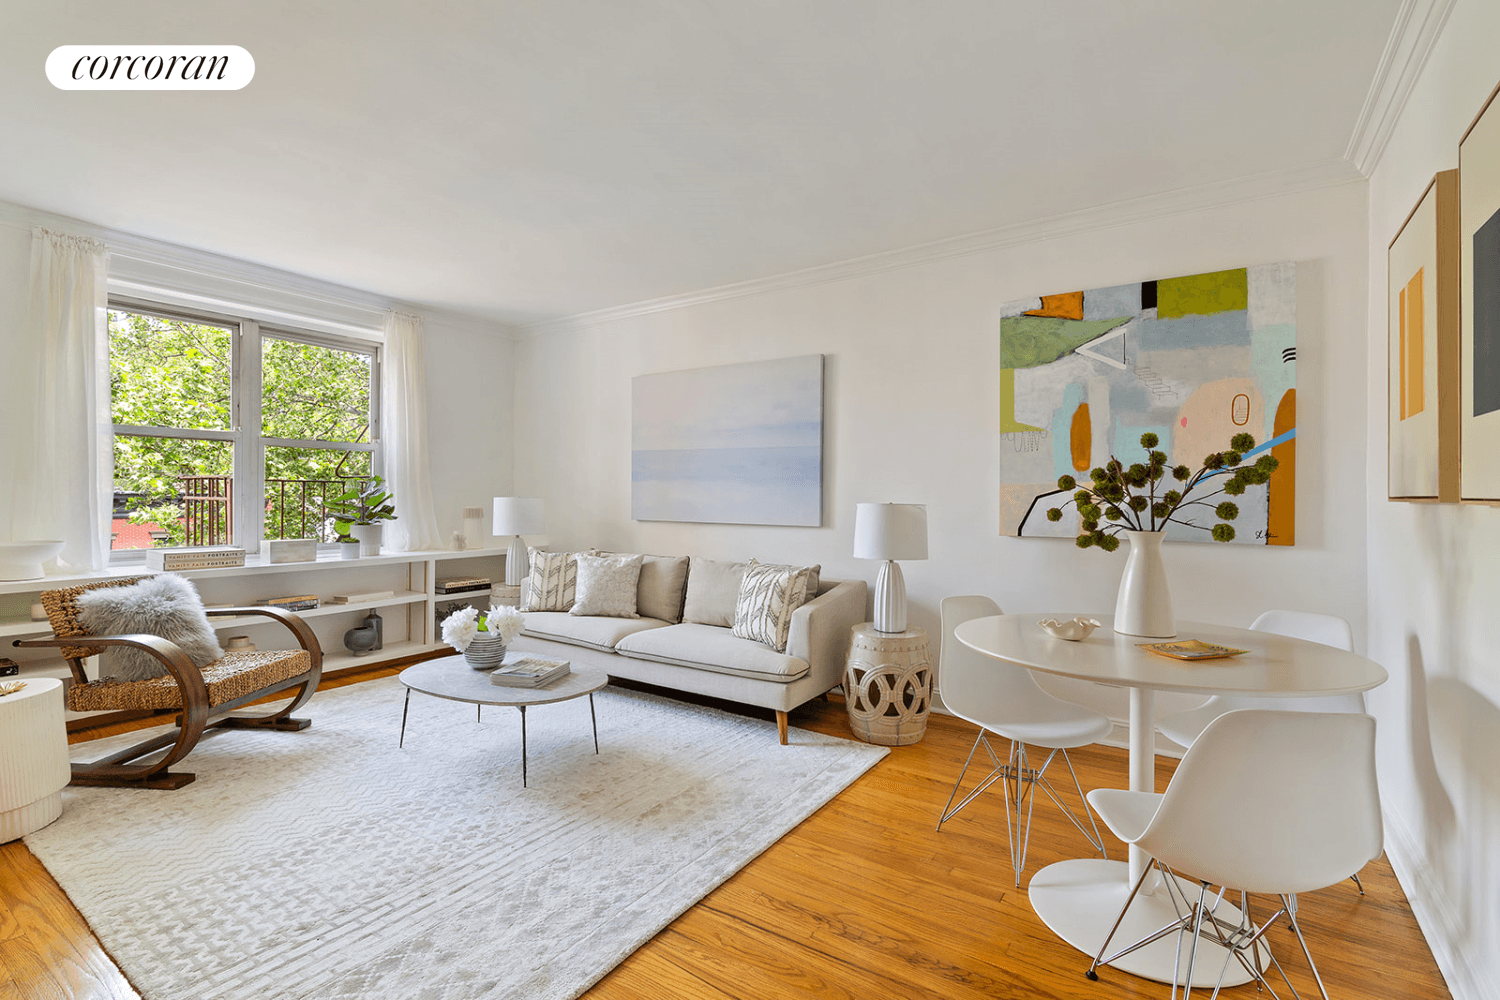 Located on a beautiful tree lined street in the heart of Cobble Hill, Apartment 5E is a light filled, spacious remodeled one bedroom with skyline views.